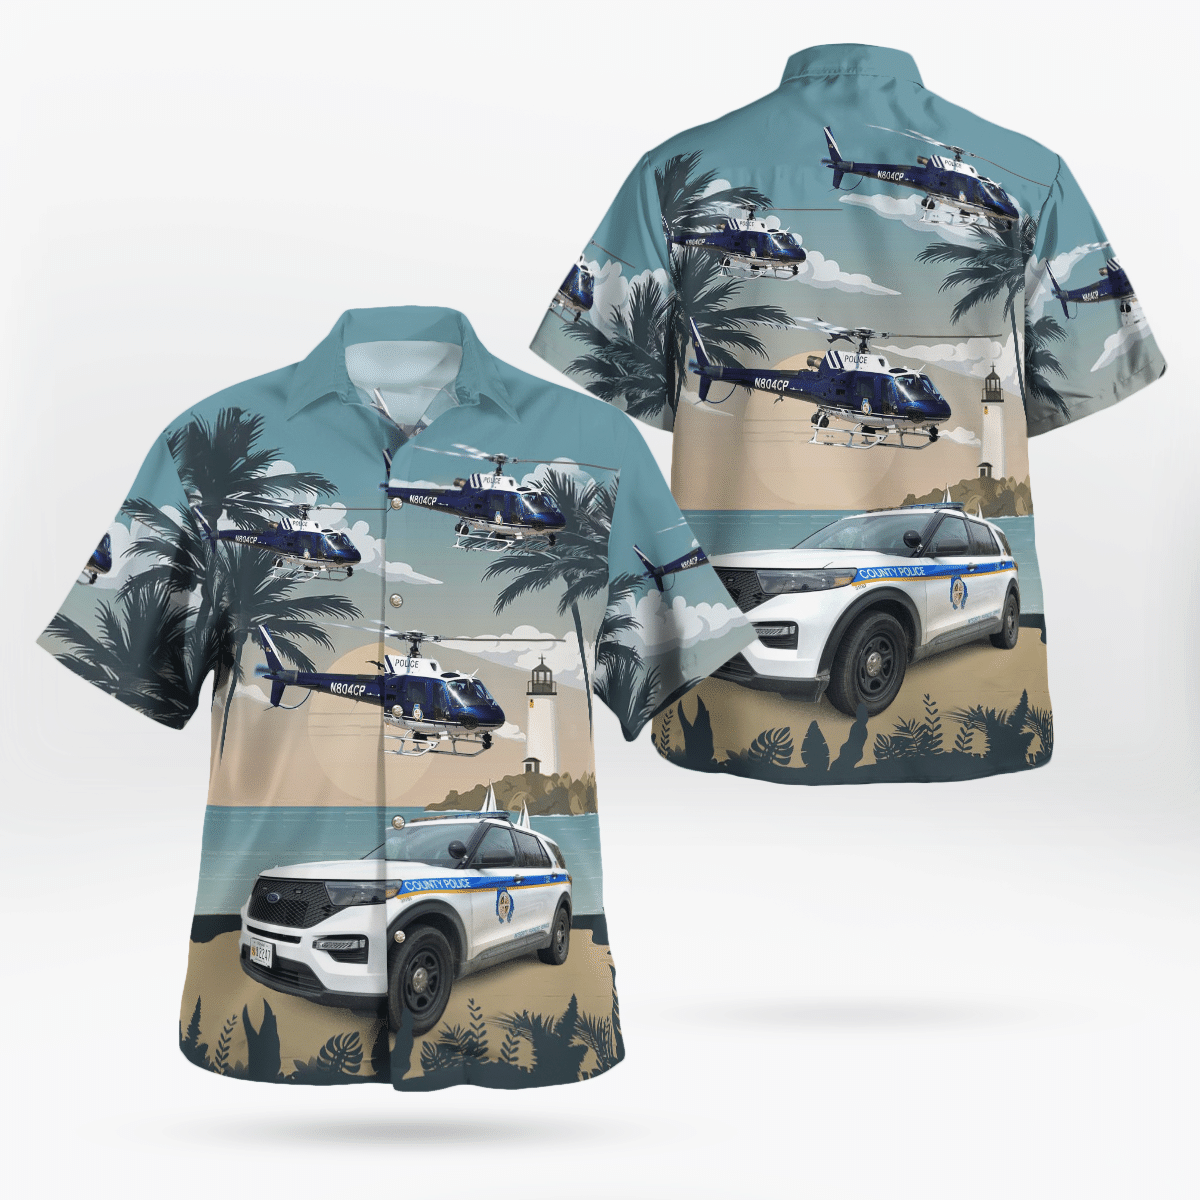 BEST Baltimore County Police Baltimore County Maryland 2020 Ford Explorer And Eurocopter AS-350B-3 Ecureuil Hawaii Shirt